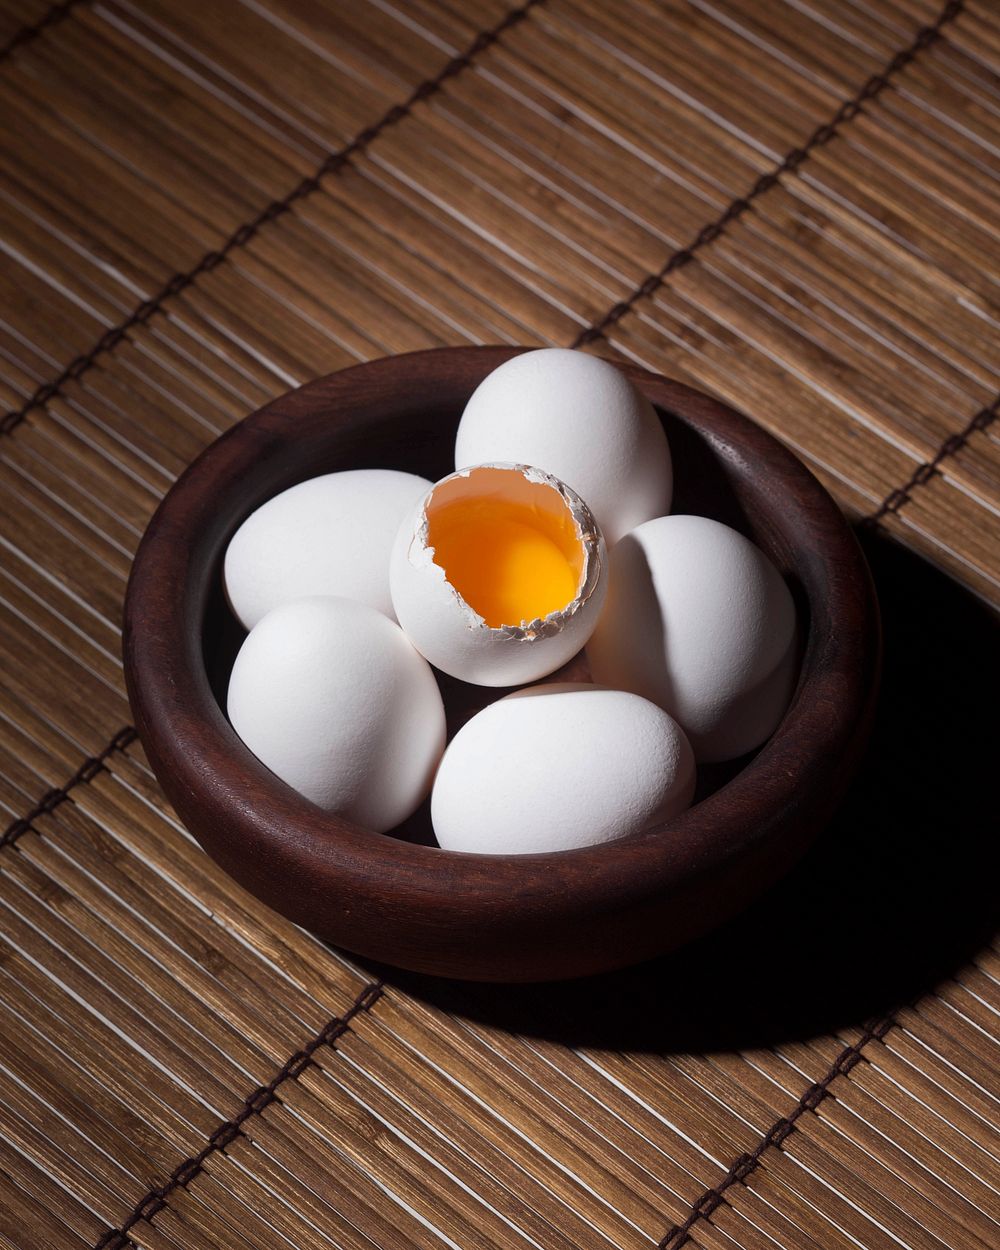 One egg cracks to show the yolk in a bowl full of eggs. Original public domain image from Wikimedia Commons